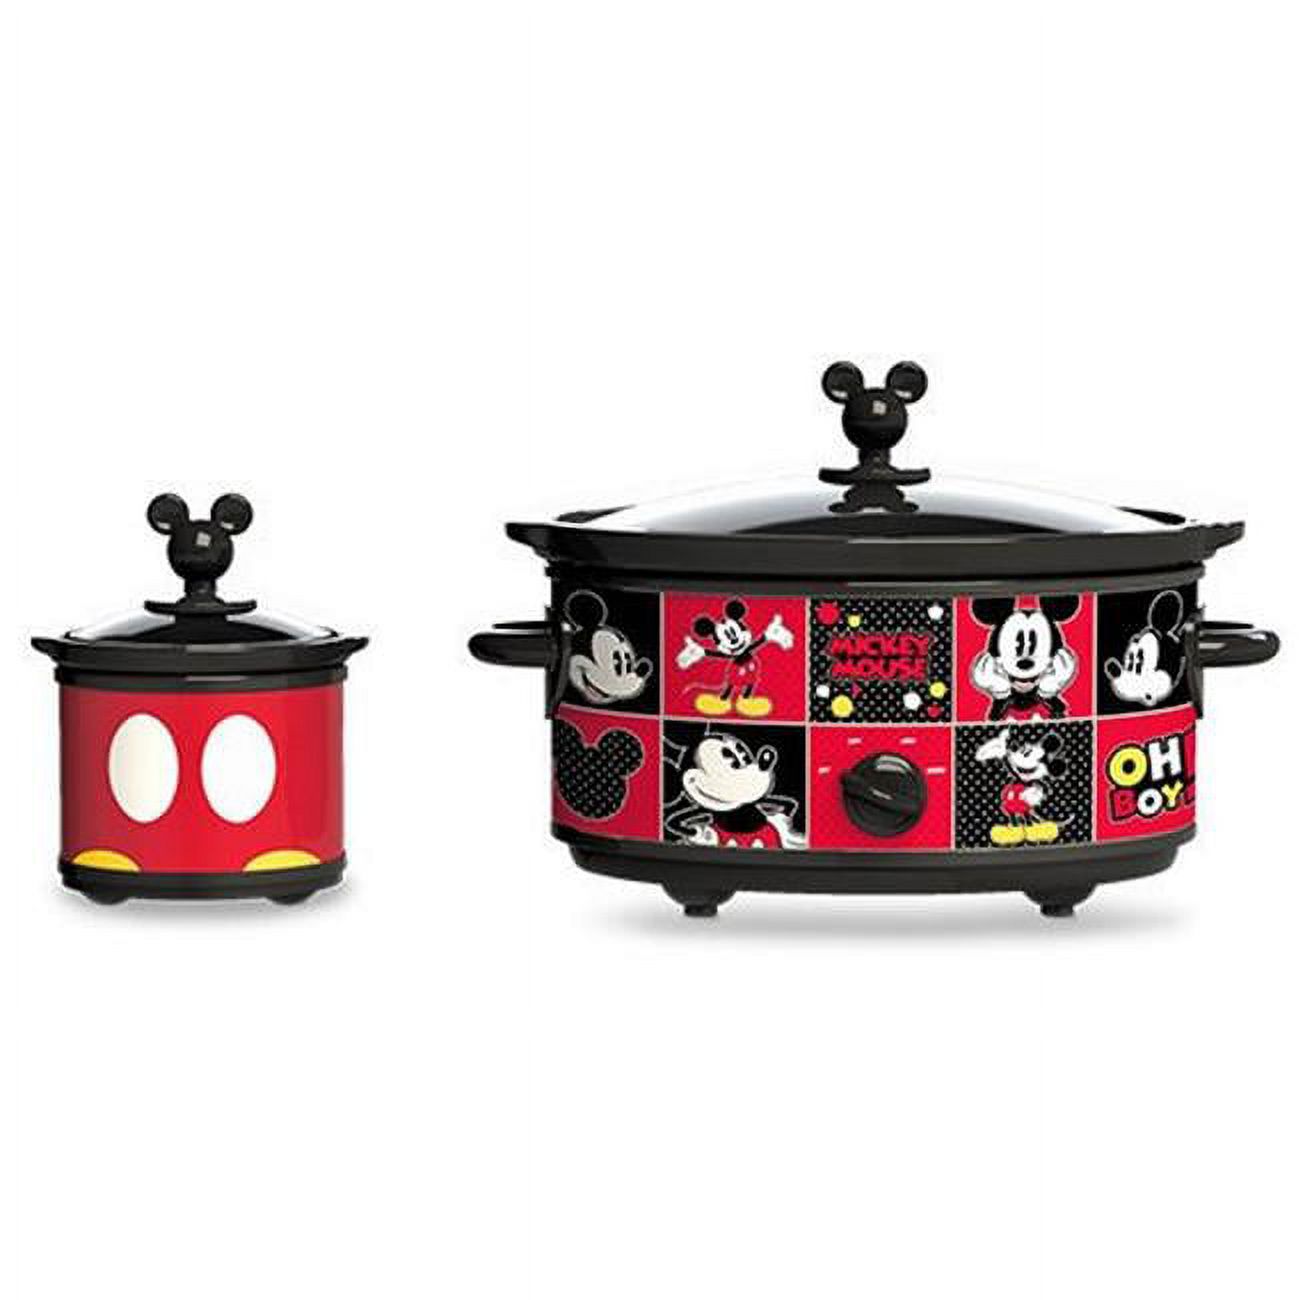 Disney DCM-502 Mickey Mouse Oval Slow Cooker with 20-Ounce Dipper, 5-Quart, Red/Black - image 2 of 5